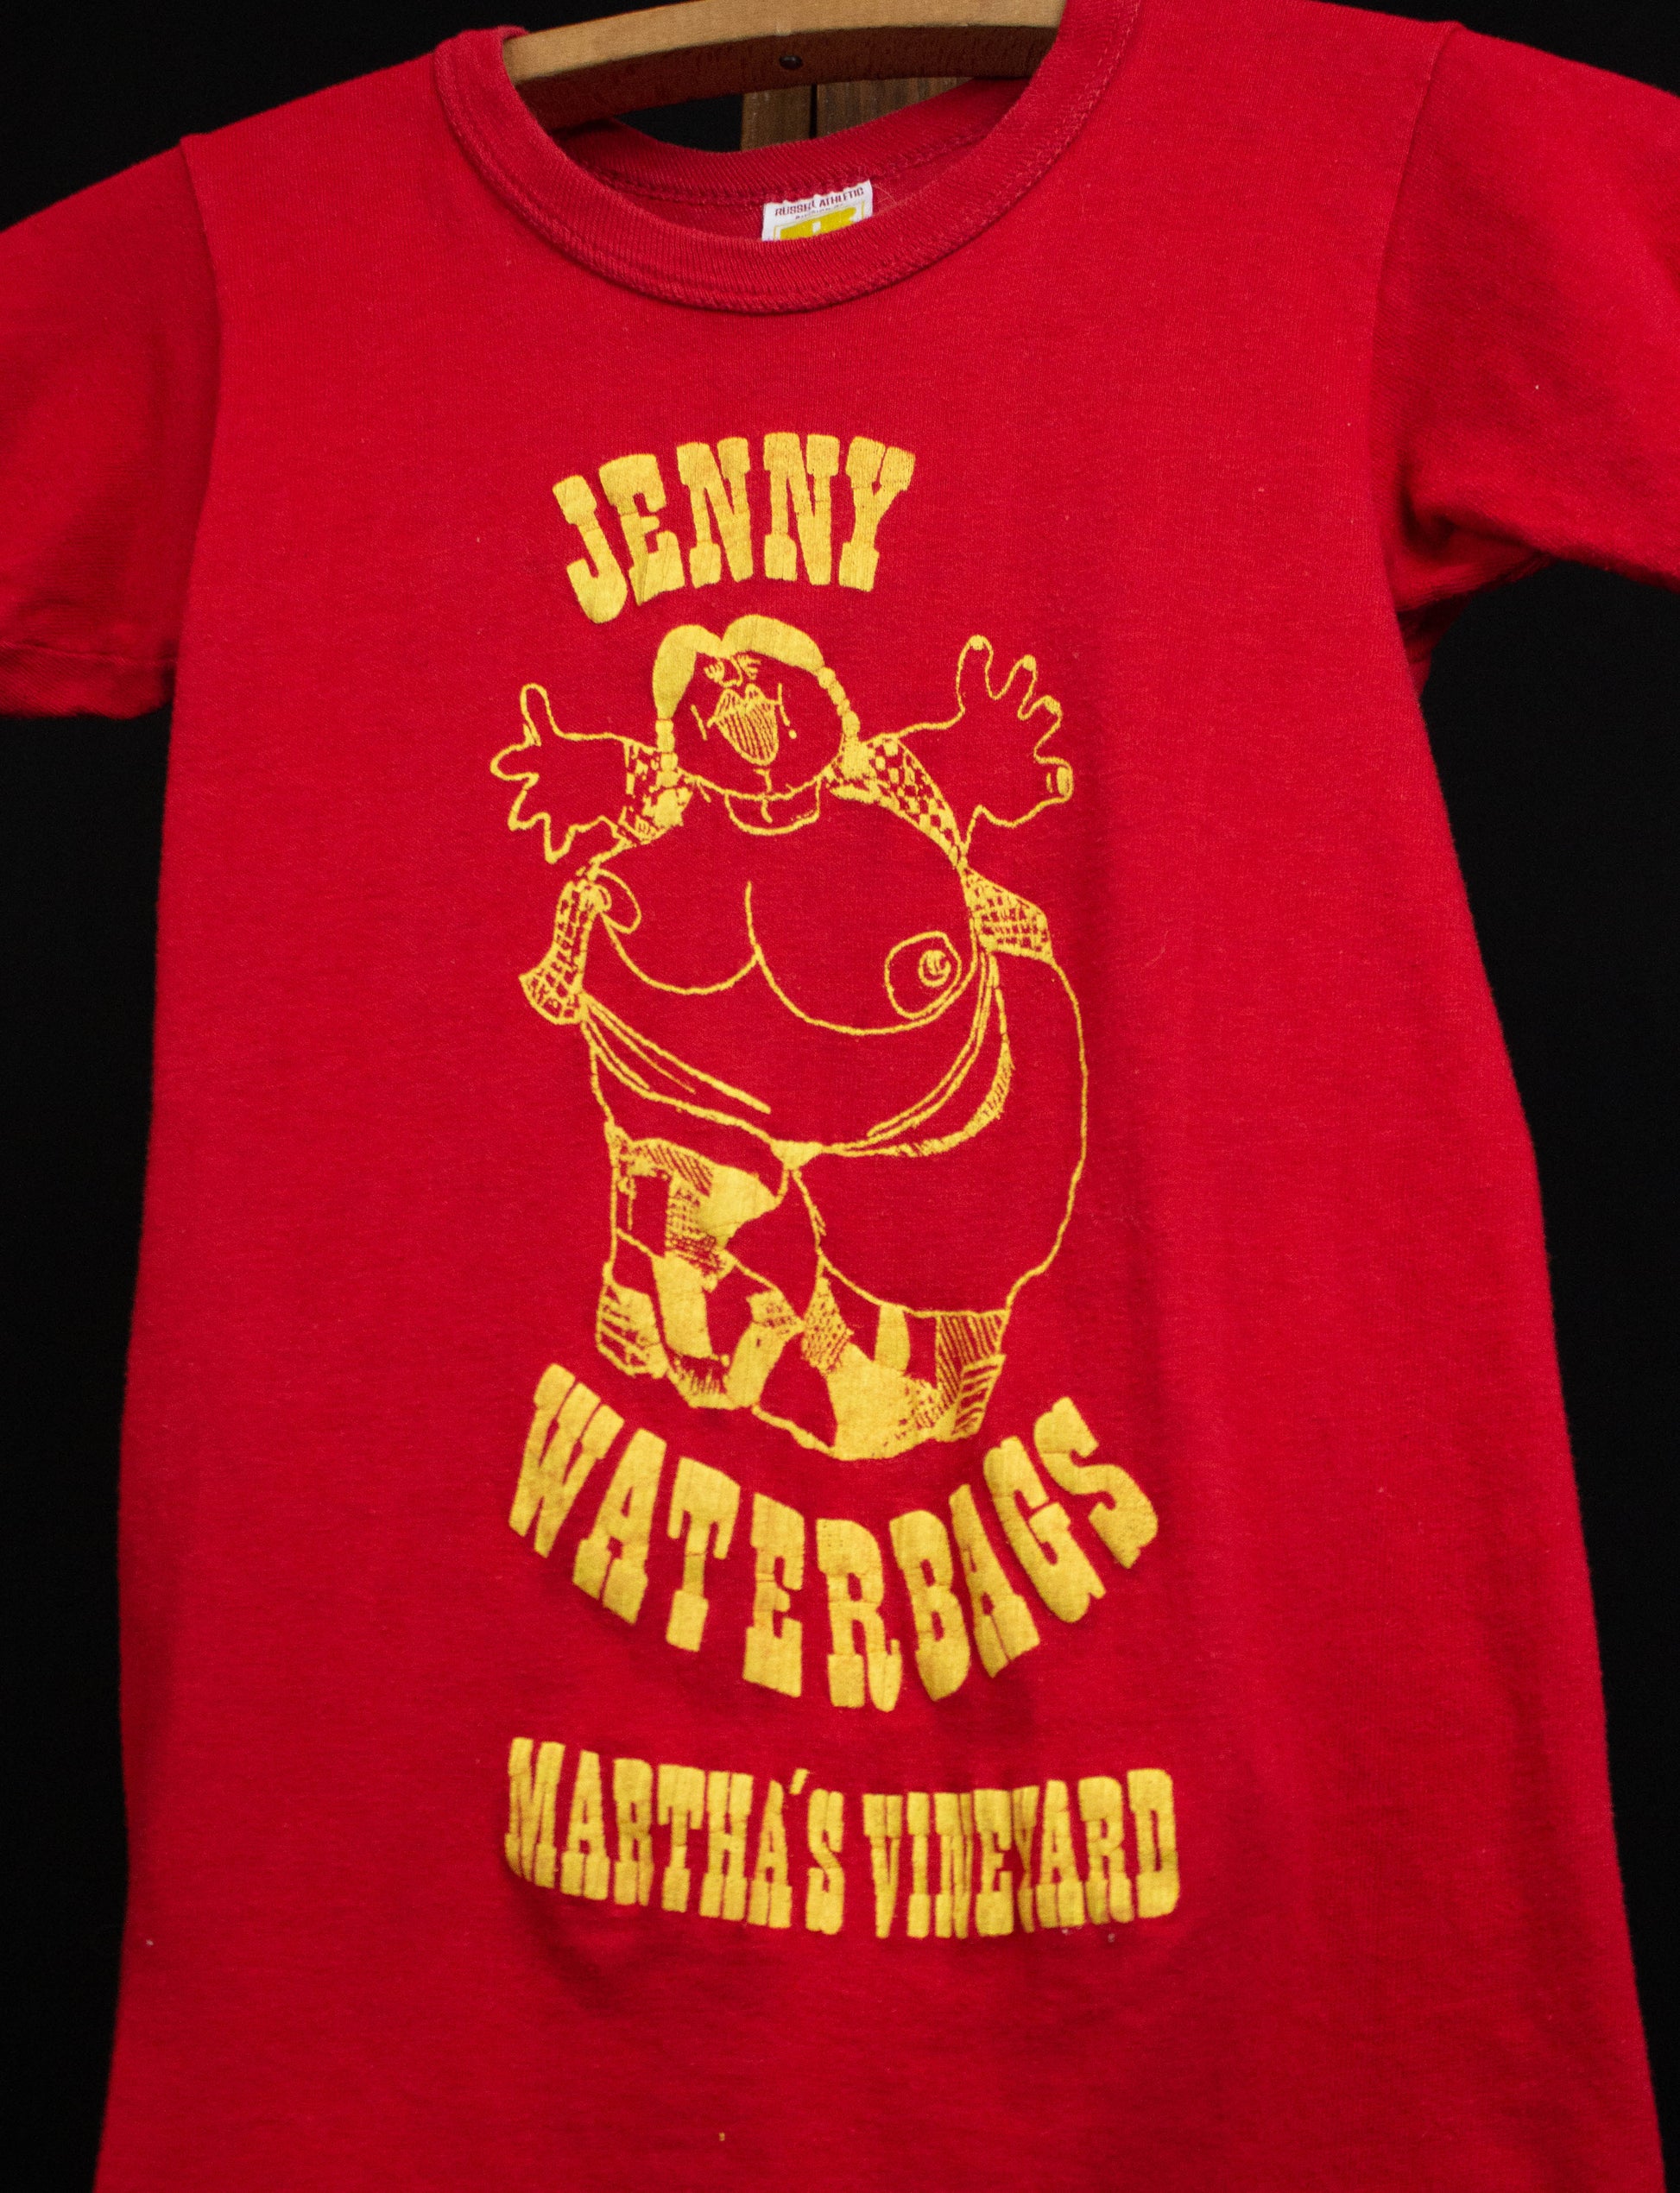 Vintage 70s Martha's Vineyard Jenny Waterbags Women's Graphic T Shirt Red XS